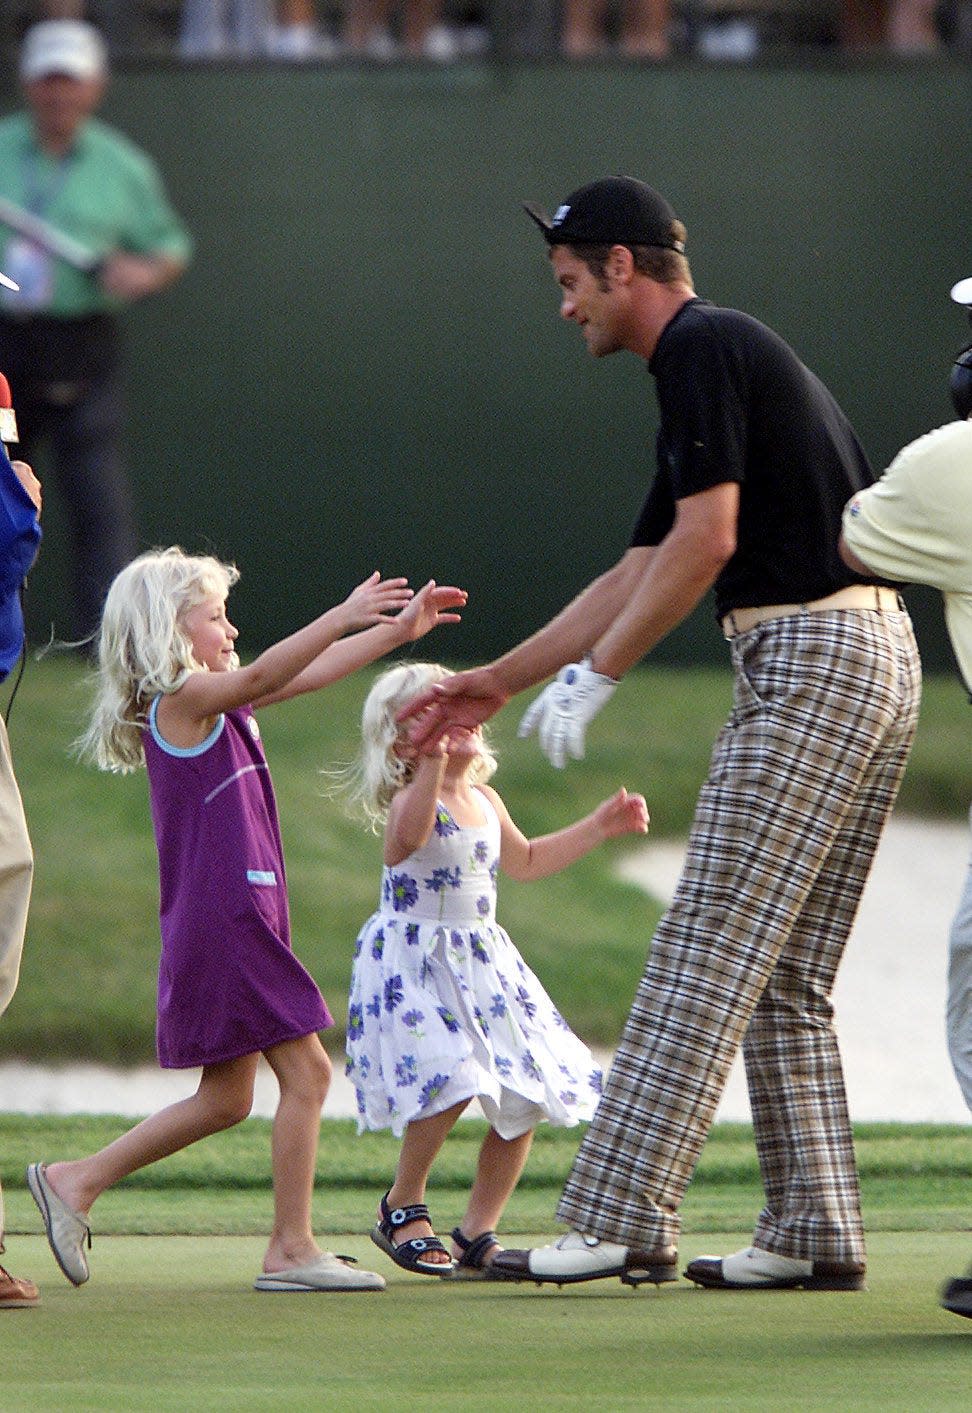 Jesper Parnevik is rushed by two of his daughters, 5-year-old Peg (left), and 3-year-old Penny, on the 18th green after winning the Honda Classic by a stroke on March 11, 2001 at the TPC at Heron Bay in Coral Springs. The Honda Classic eventually moved to PGA National in Palm Beach Gardens and is now called the Cognizant Classic.